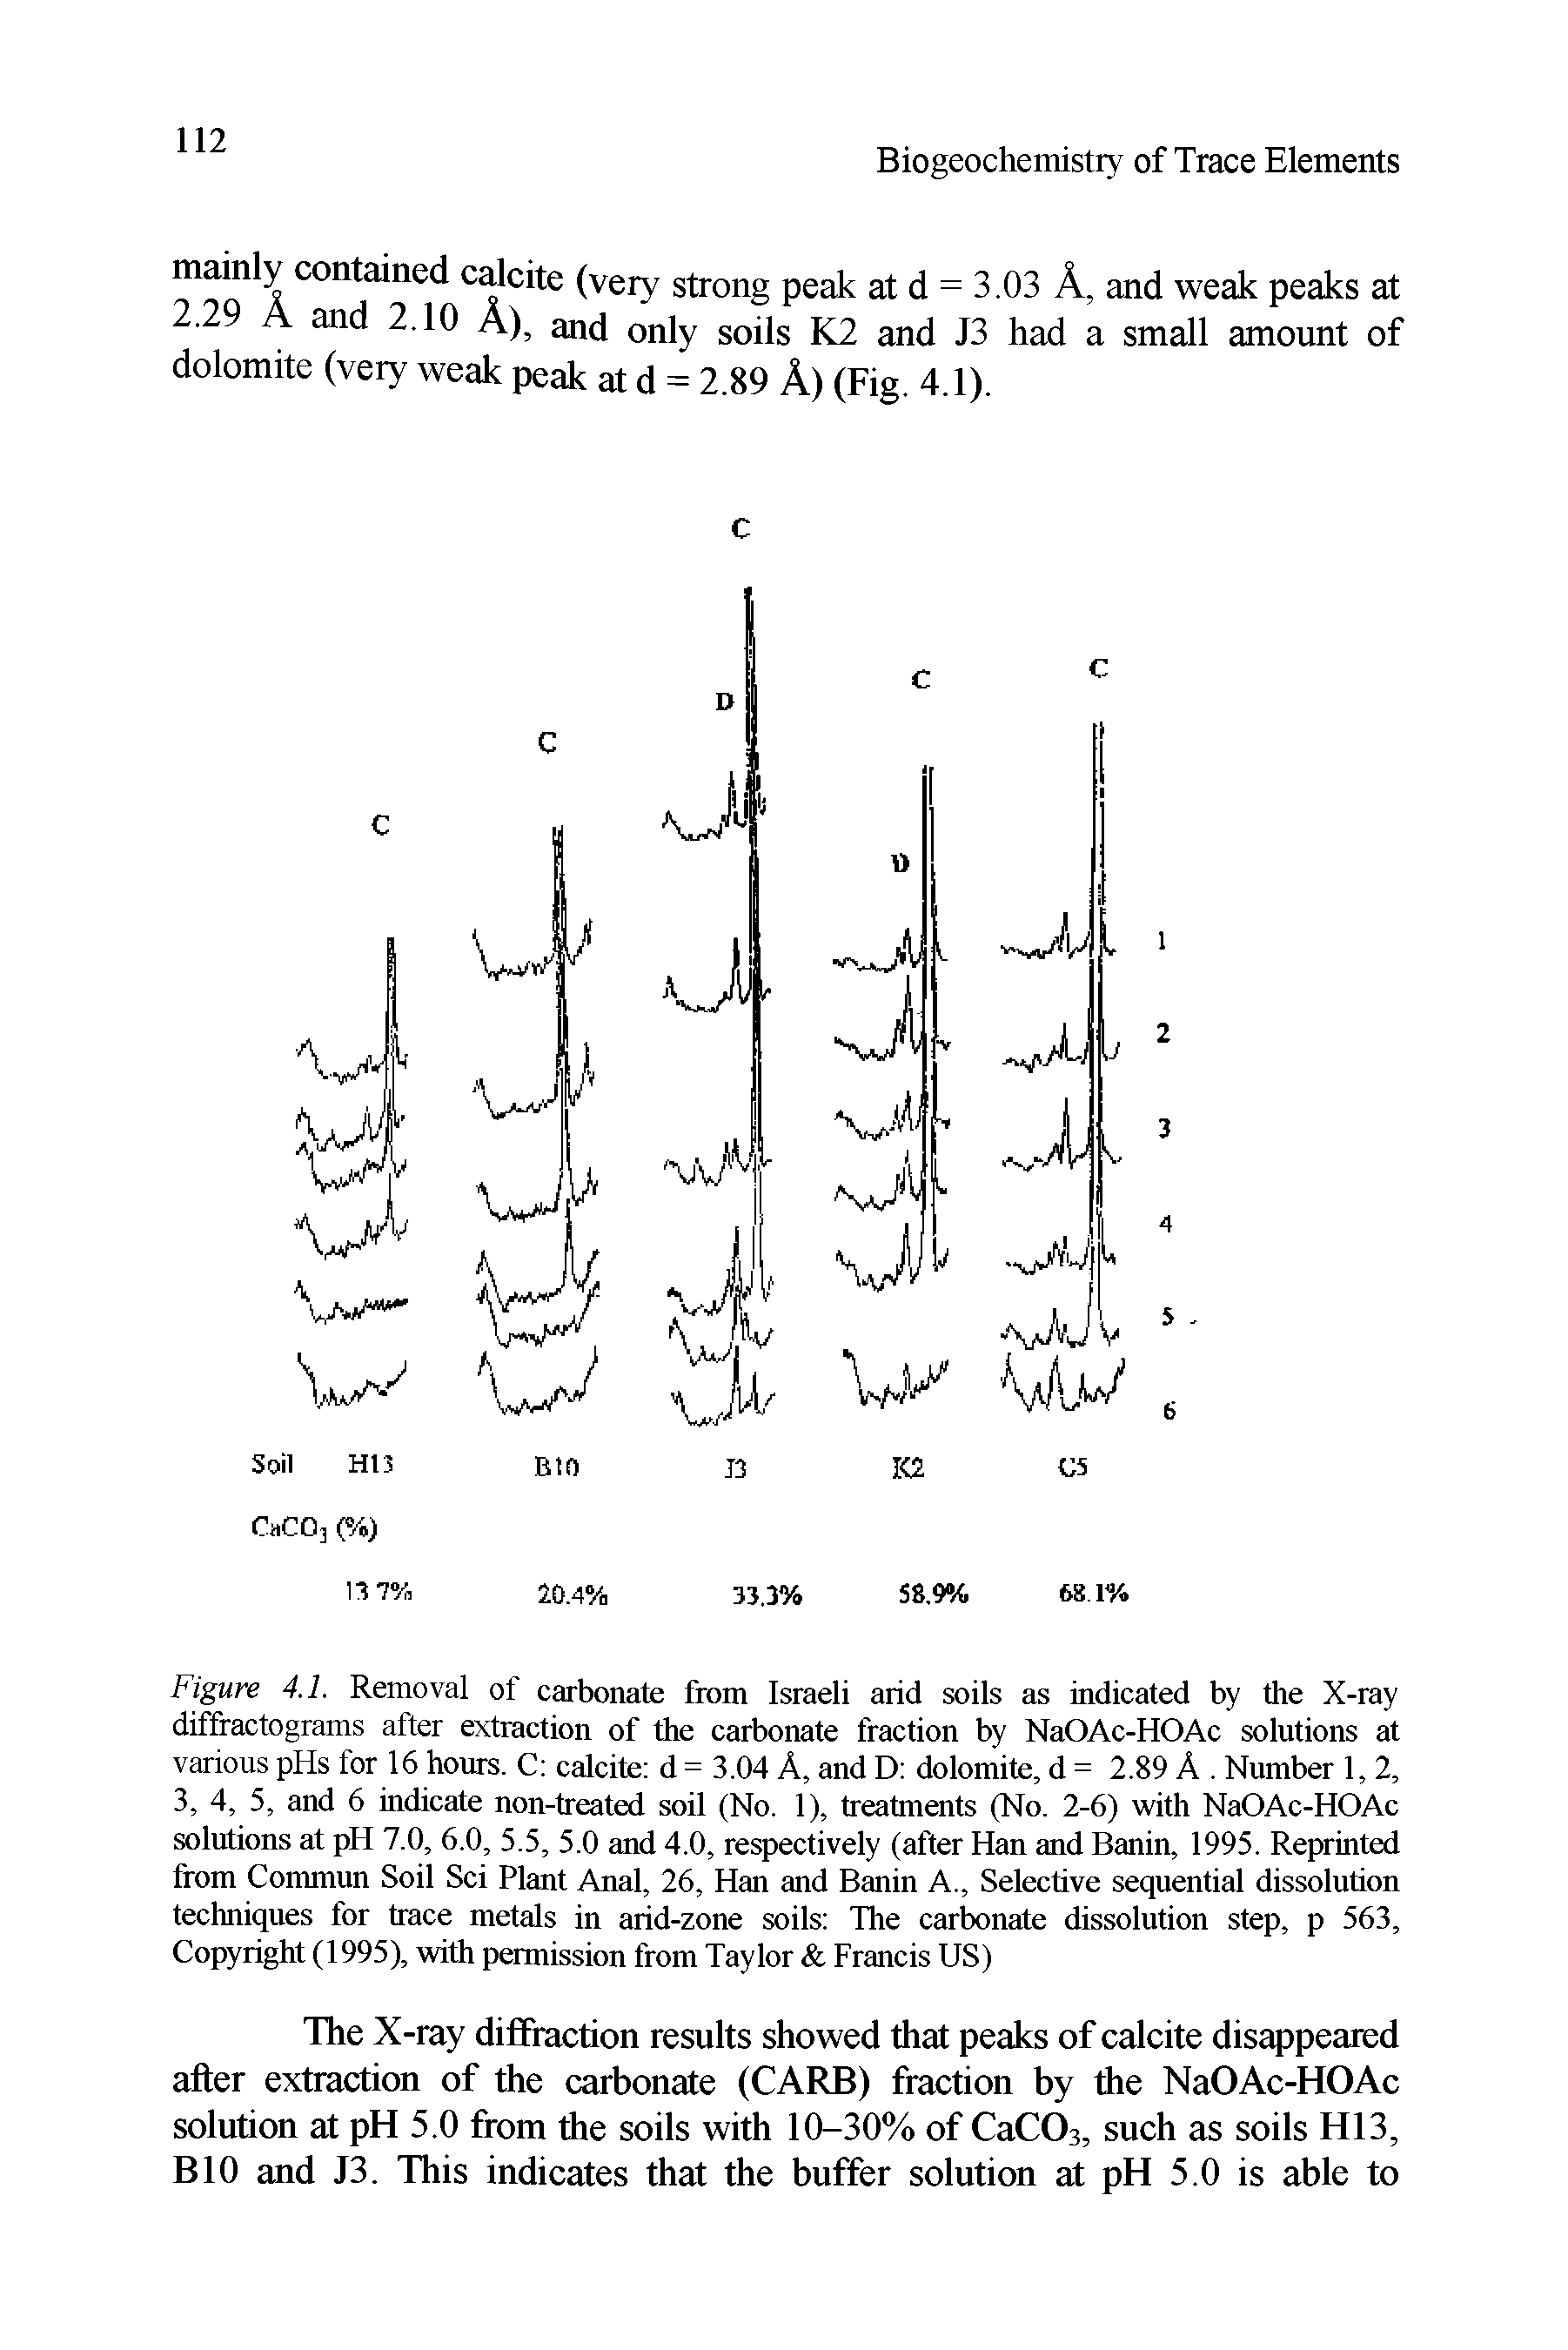 Figure 4.1. Removal of carbonate from Israeli arid soils as indicated by the X-ray diffractograms after extraction of the carbonate fraction by NaOAc-HOAc solutions at various pHs for 16 hours. C calcite d = 3.04 A, and D dolomite, d = 2.89 A. Number 1, 2, 3, 4, 5, and 6 indicate non-treated soil (No. 1), treatments (No. 2-6) with NaOAc-HOAc solutions at pH 7.0, 6.0, 5.5, 5.0 and 4.0, respectively (after Han and Banin, 1995. Reprinted from Commun Soil Sci Plant Anal, 26, Han and Banin A., Selective sequential dissolution techniques for trace metals in arid-zone soils The carbonate dissolution step, p 563, Copyright (1995), with permission from Taylor Francis US)...